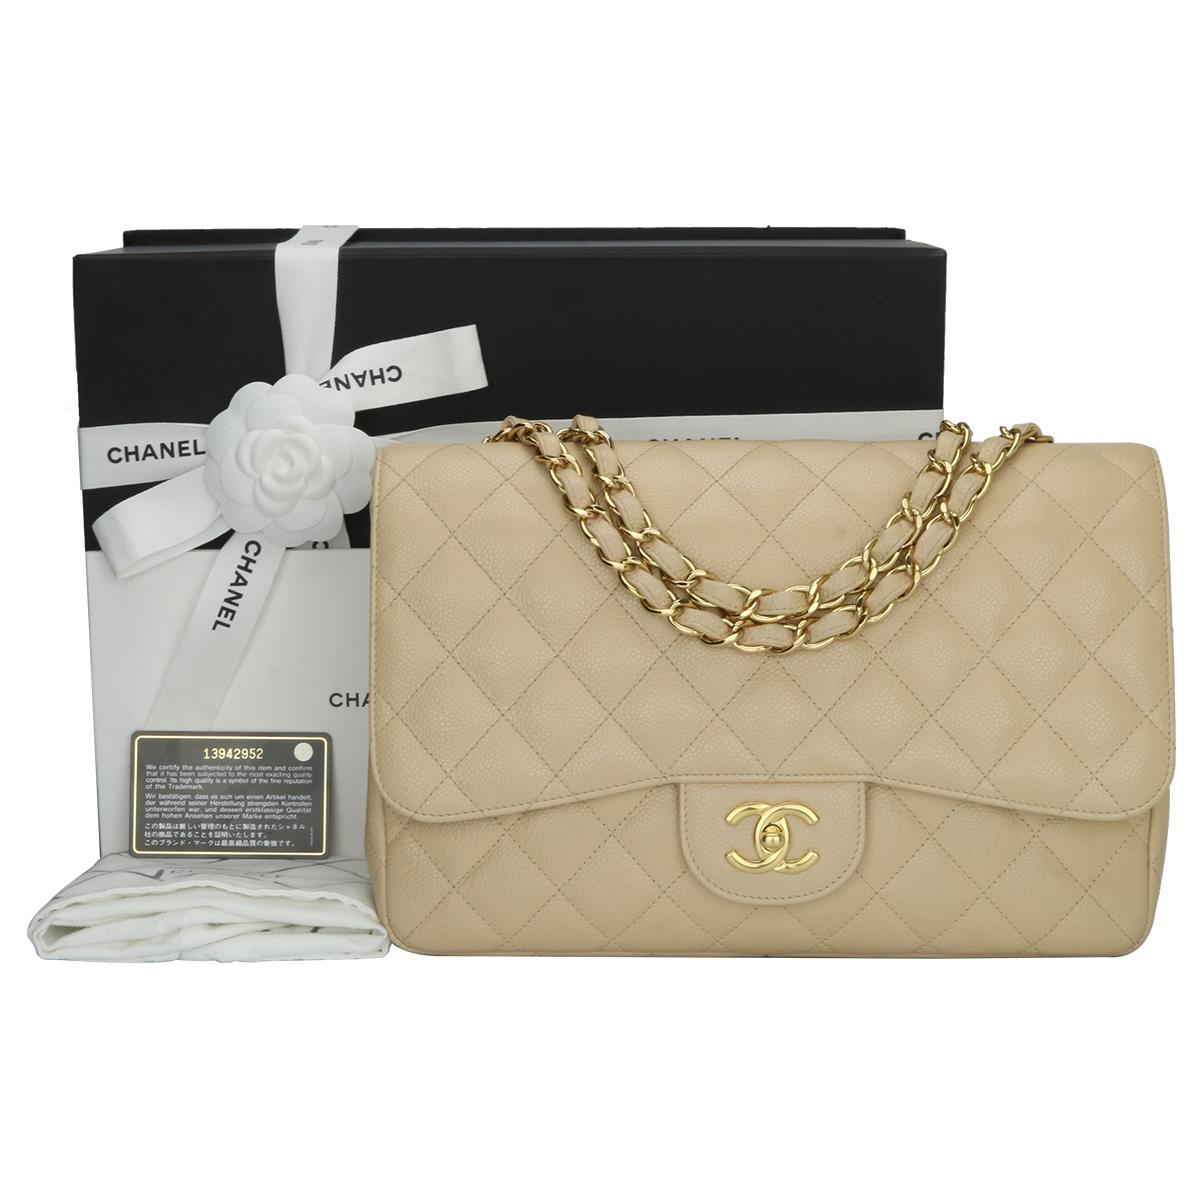 Authentic CHANEL Classic Single Flap Jumbo Bag Beige Clair Caviar with Gold Hardware 2009.

This stunning bag is in mint condition, the bag still holds the original shape and the hardware is still very shiny.

Exterior Condition: Mint condition,